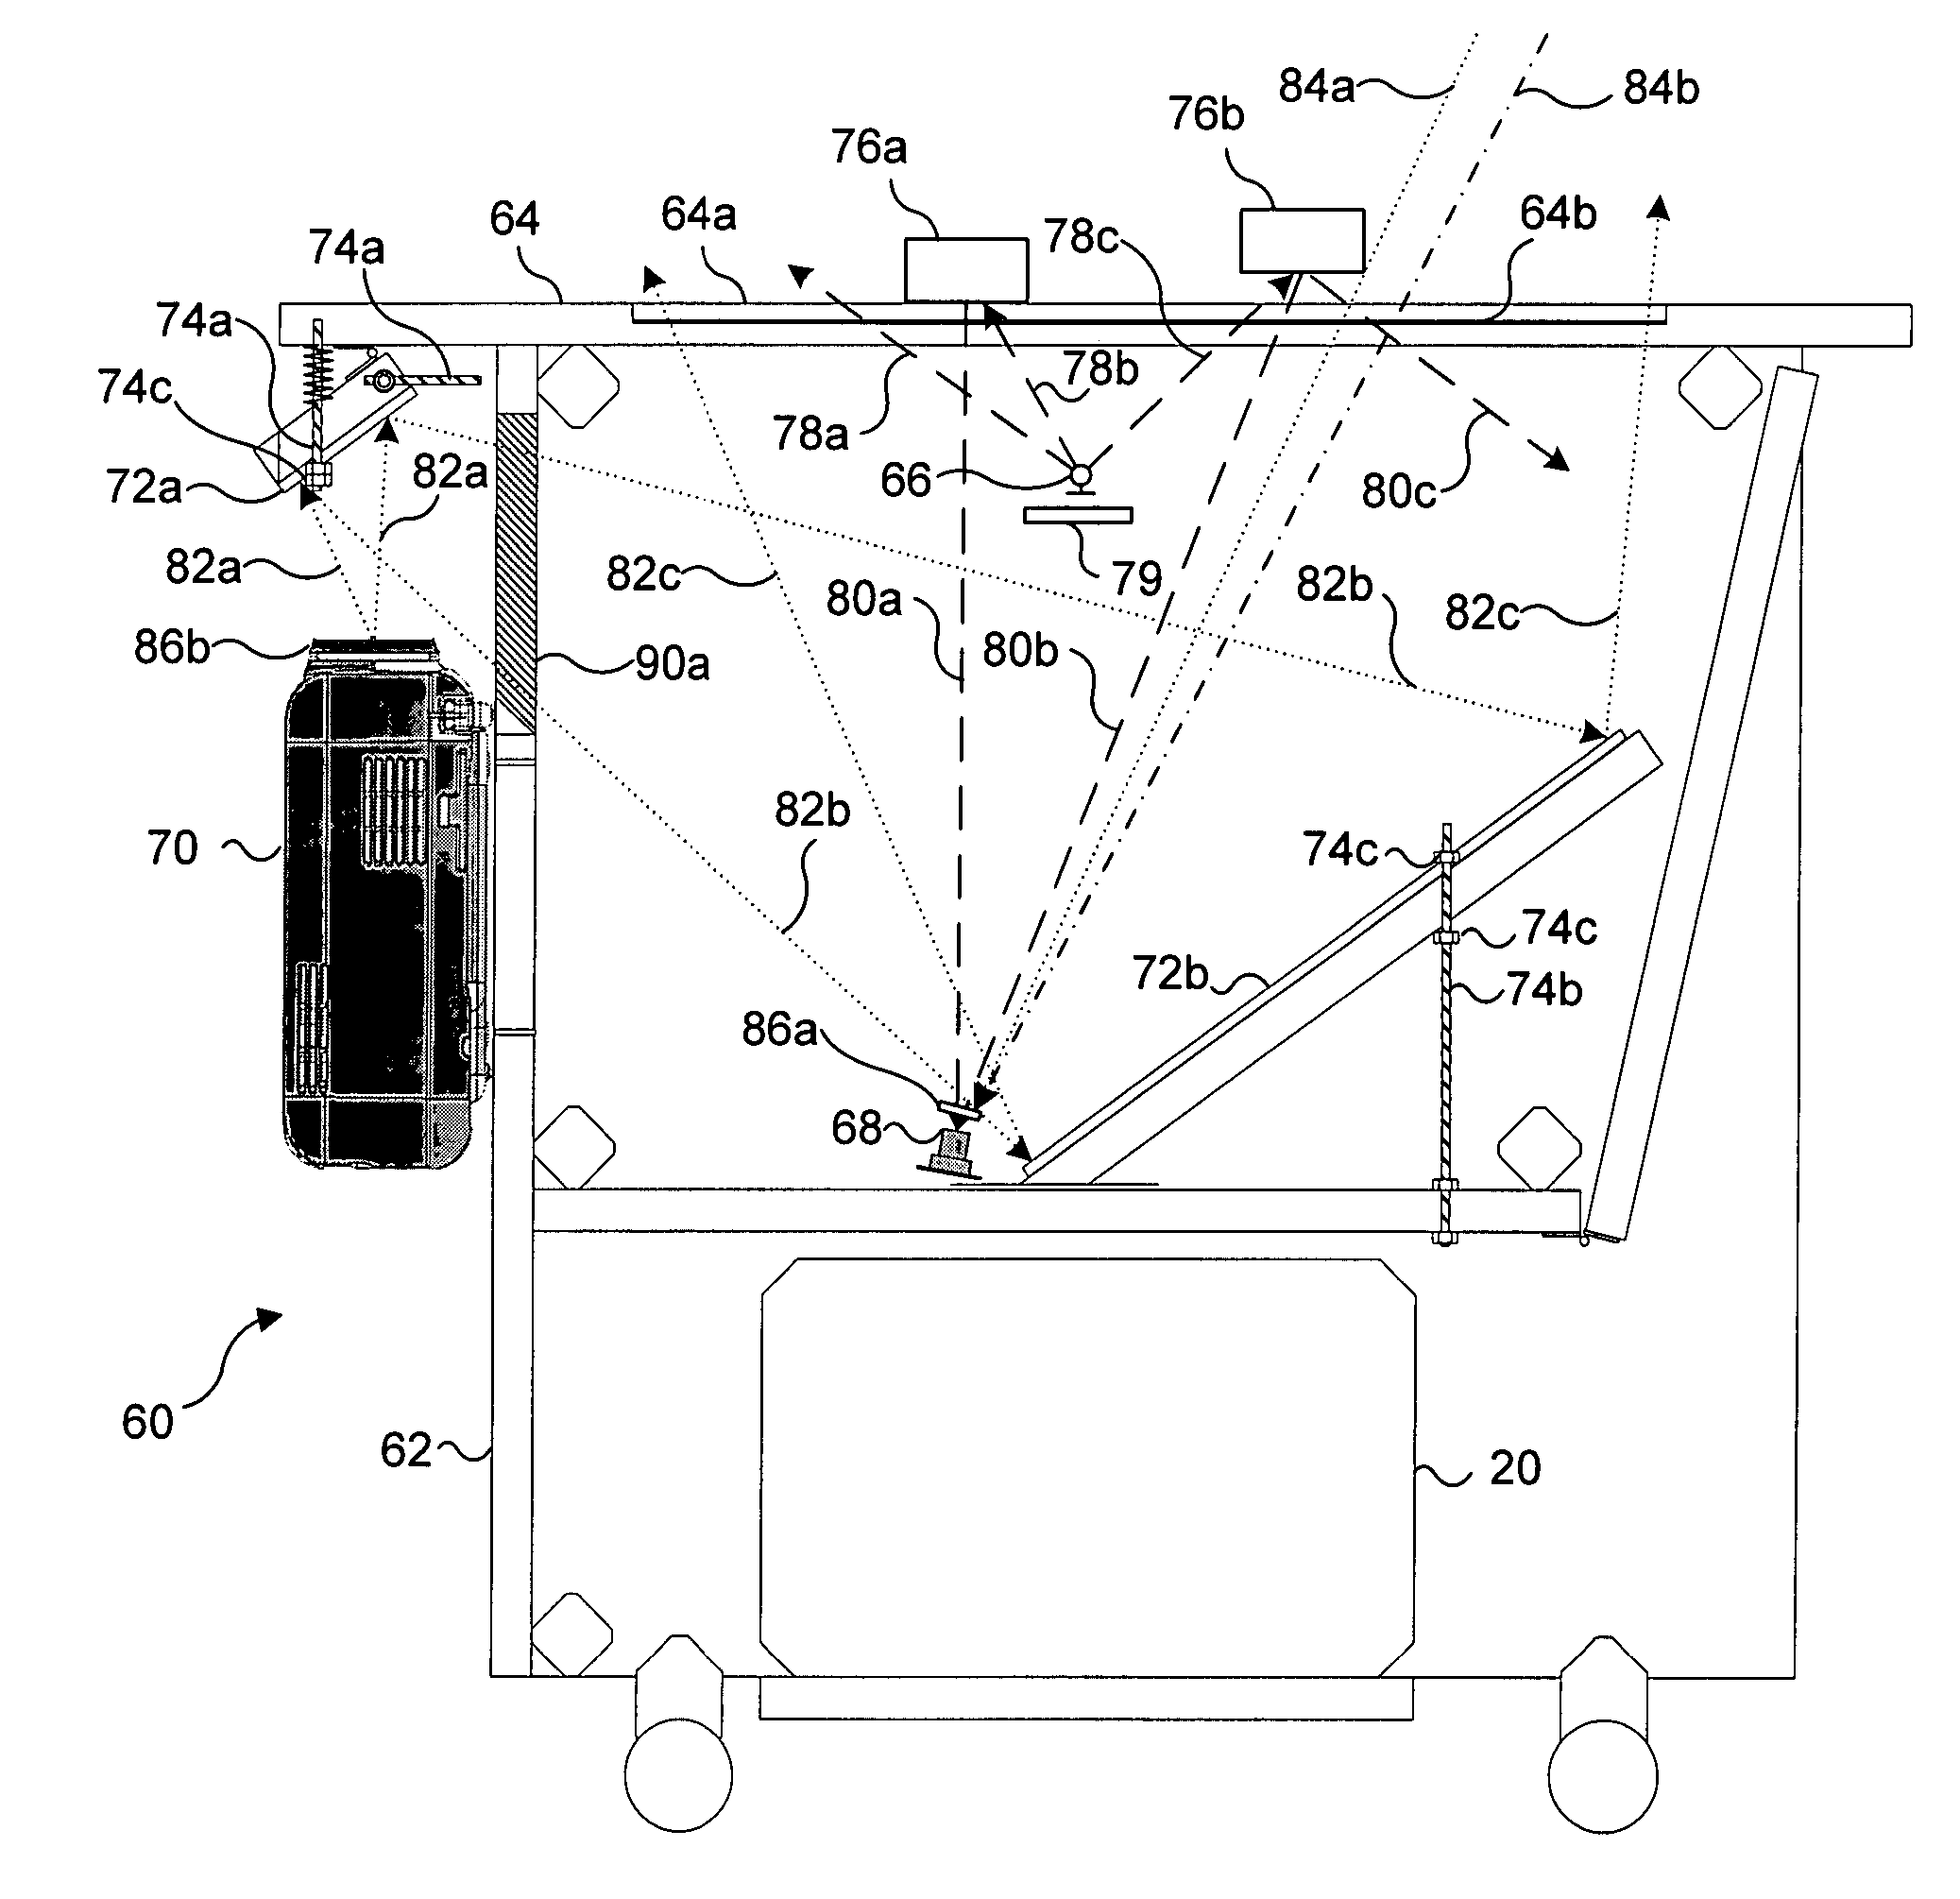 Disposing identifying codes on a user's hand to provide input to an interactive display application